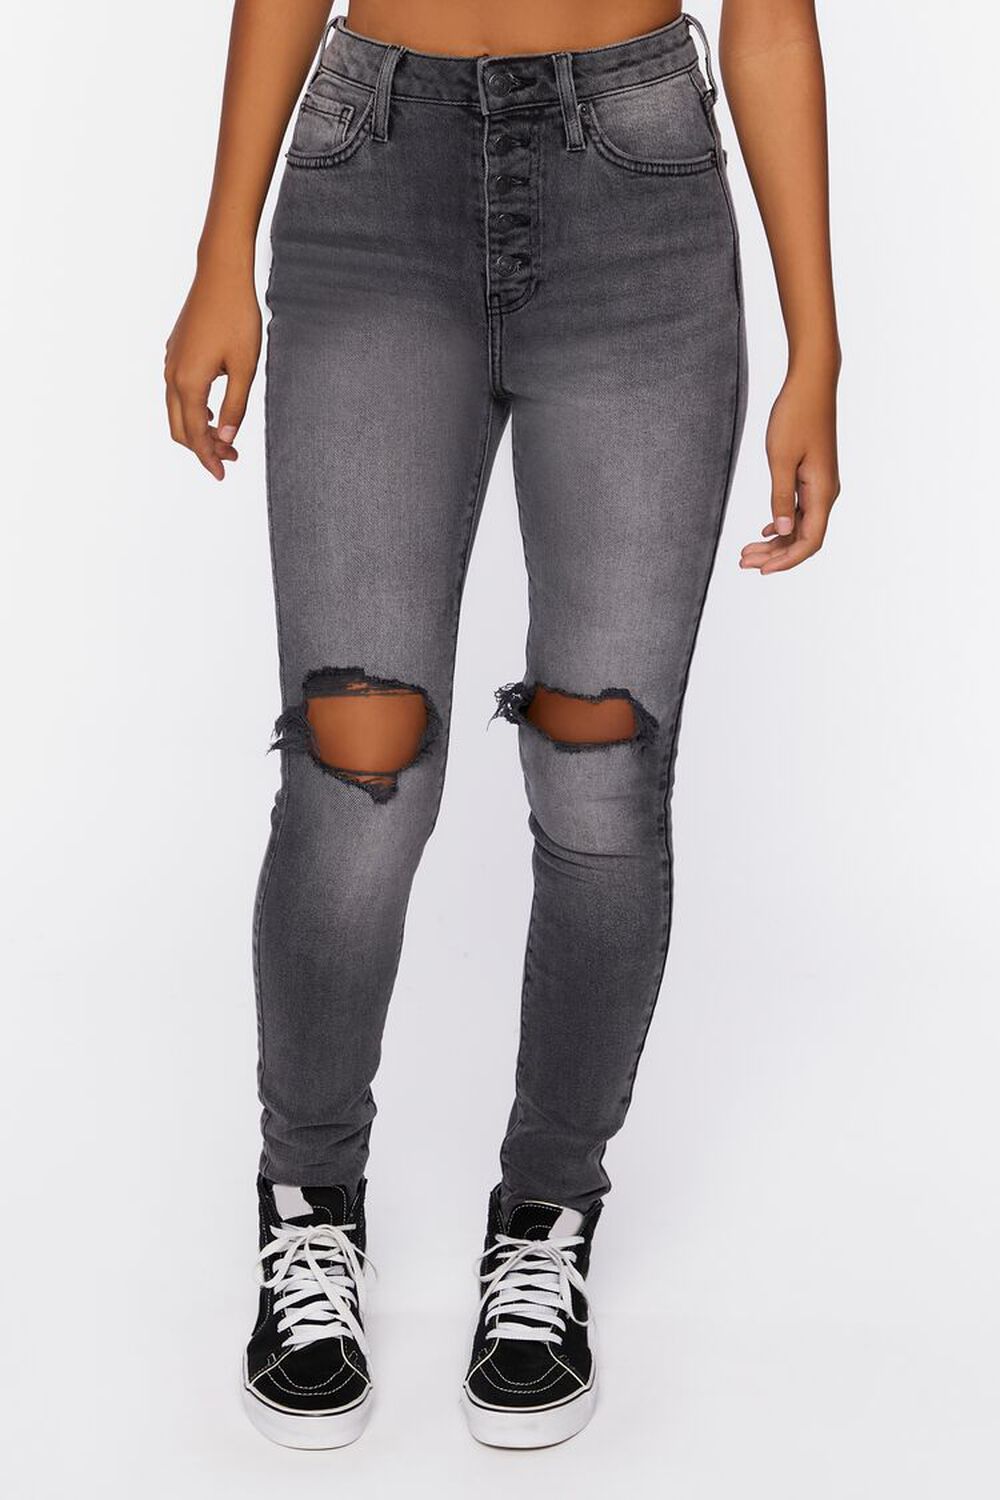 WASHED BLACK Recycled Cotton Distressed Skinny Jeans, image 1